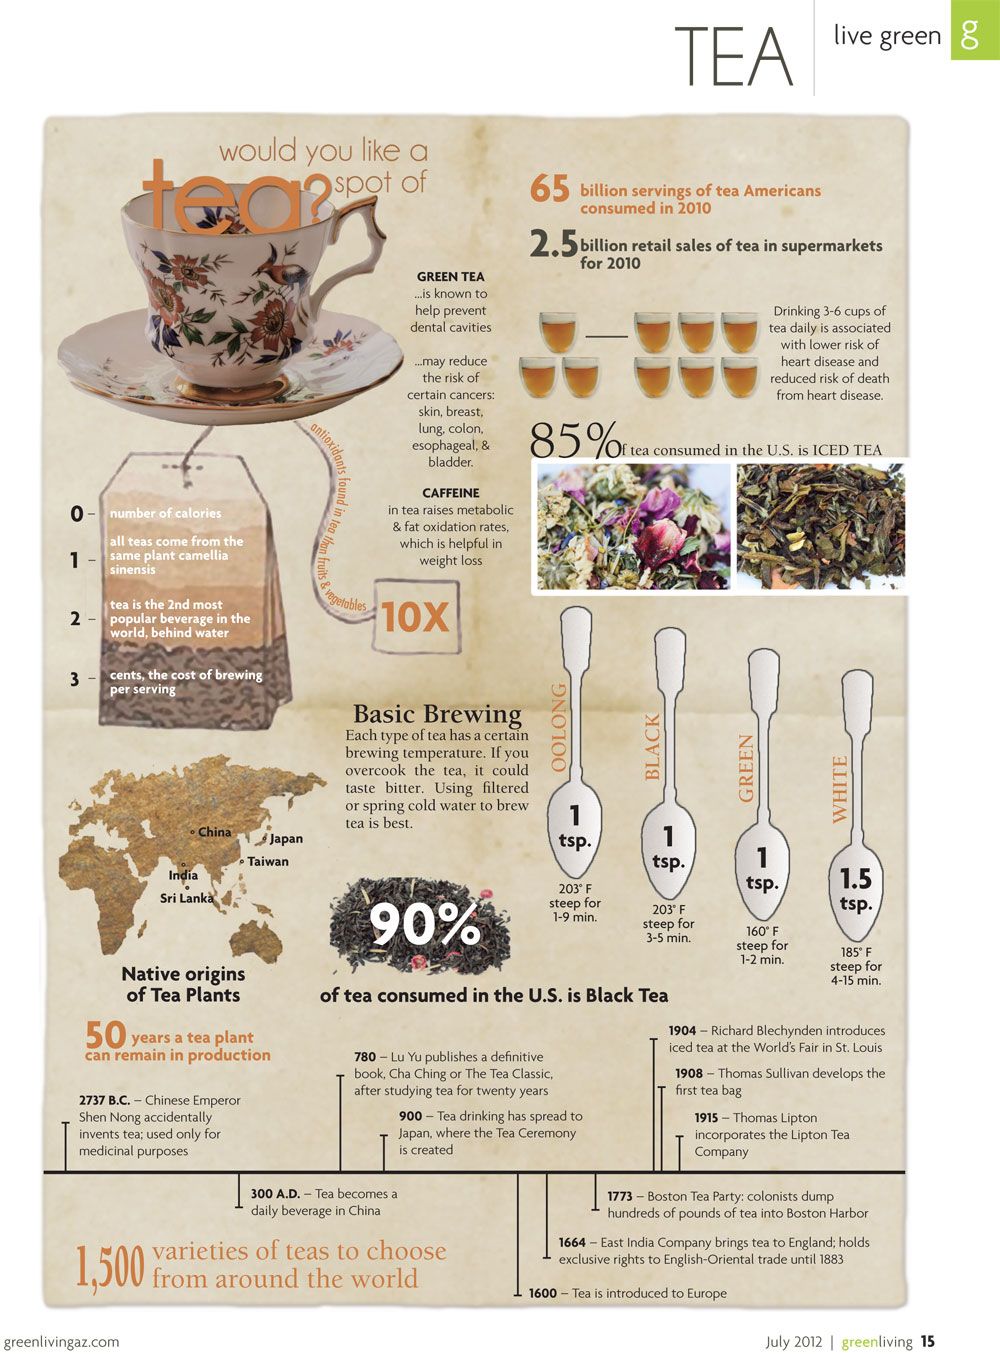 Would You Like a Spot of Tea? | Daily Infographic